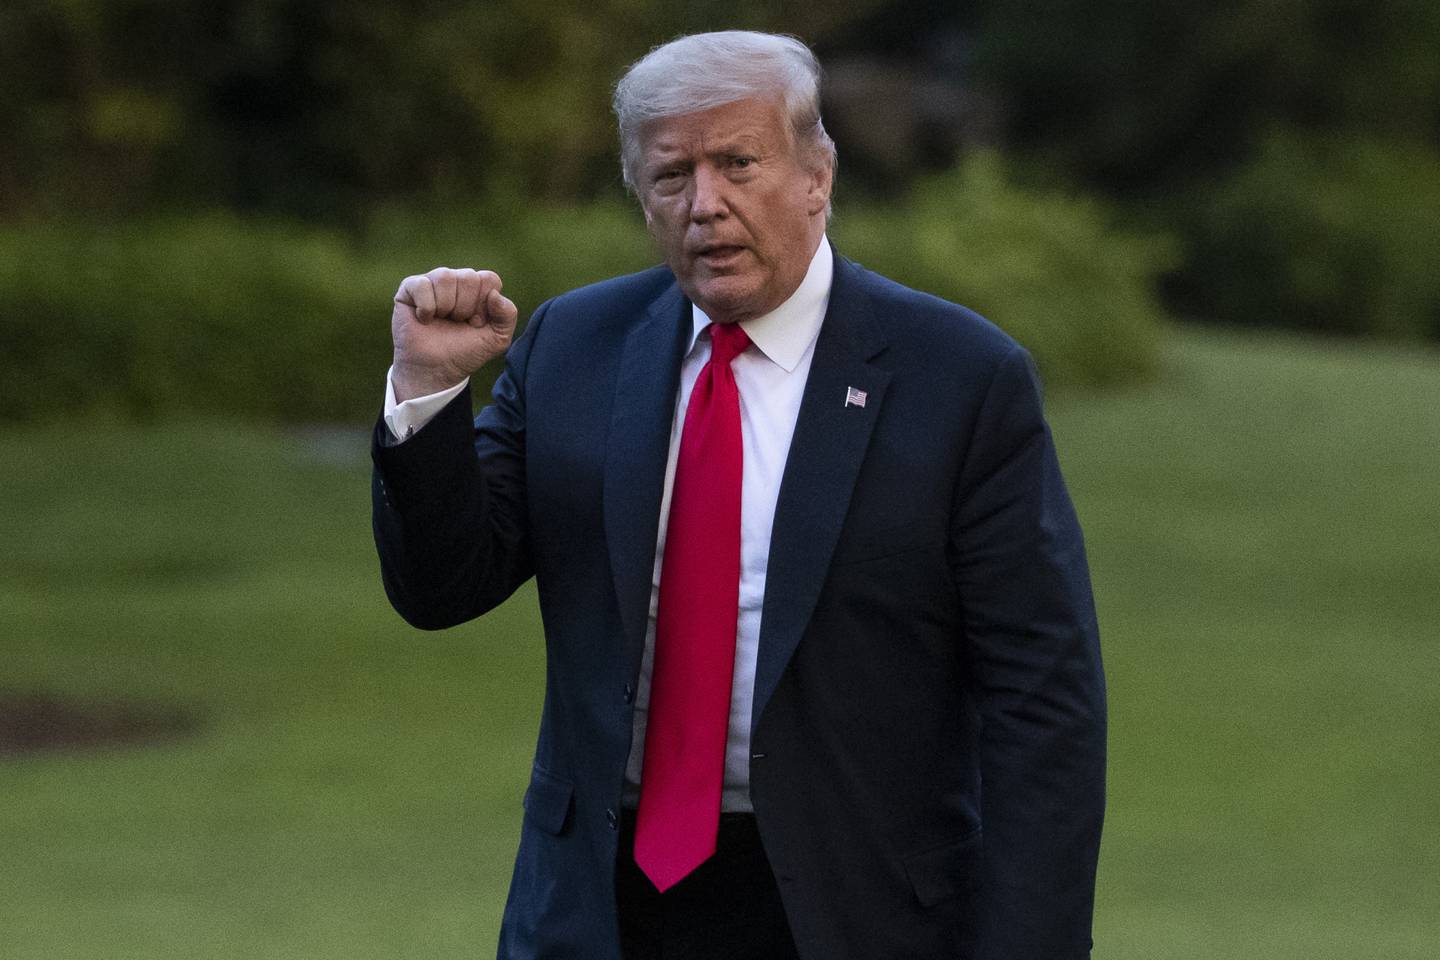 President Donald Trump pumps his fist as he walks on the South Lawn after arriving on Marine One at the White House on June 25, 2020, in Washington.